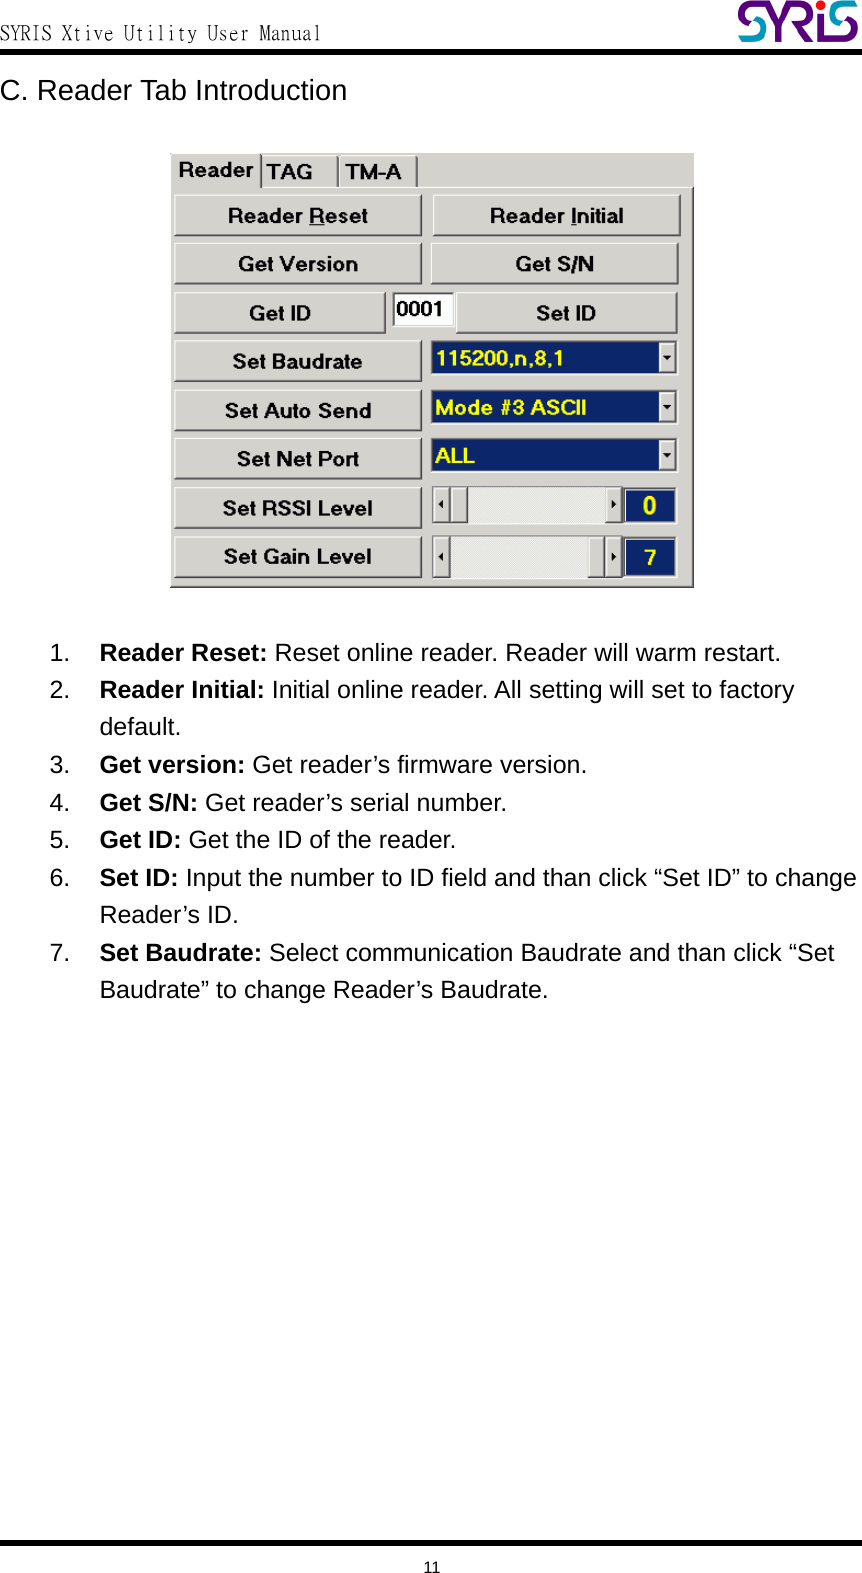  SYRIS Xtive Utility User Manual  C. Reader Tab Introduction    1.  Reader Reset: Reset online reader. Reader will warm restart. 2.  Reader Initial: Initial online reader. All setting will set to factory default. 3.  Get version: Get reader’s firmware version. 4.  Get S/N: Get reader’s serial number. 5.  Get ID: Get the ID of the reader. 6.  Set ID: Input the number to ID field and than click “Set ID” to change Reader’s ID. 7.  Set Baudrate: Select communication Baudrate and than click “Set Baudrate” to change Reader’s Baudrate.   11 